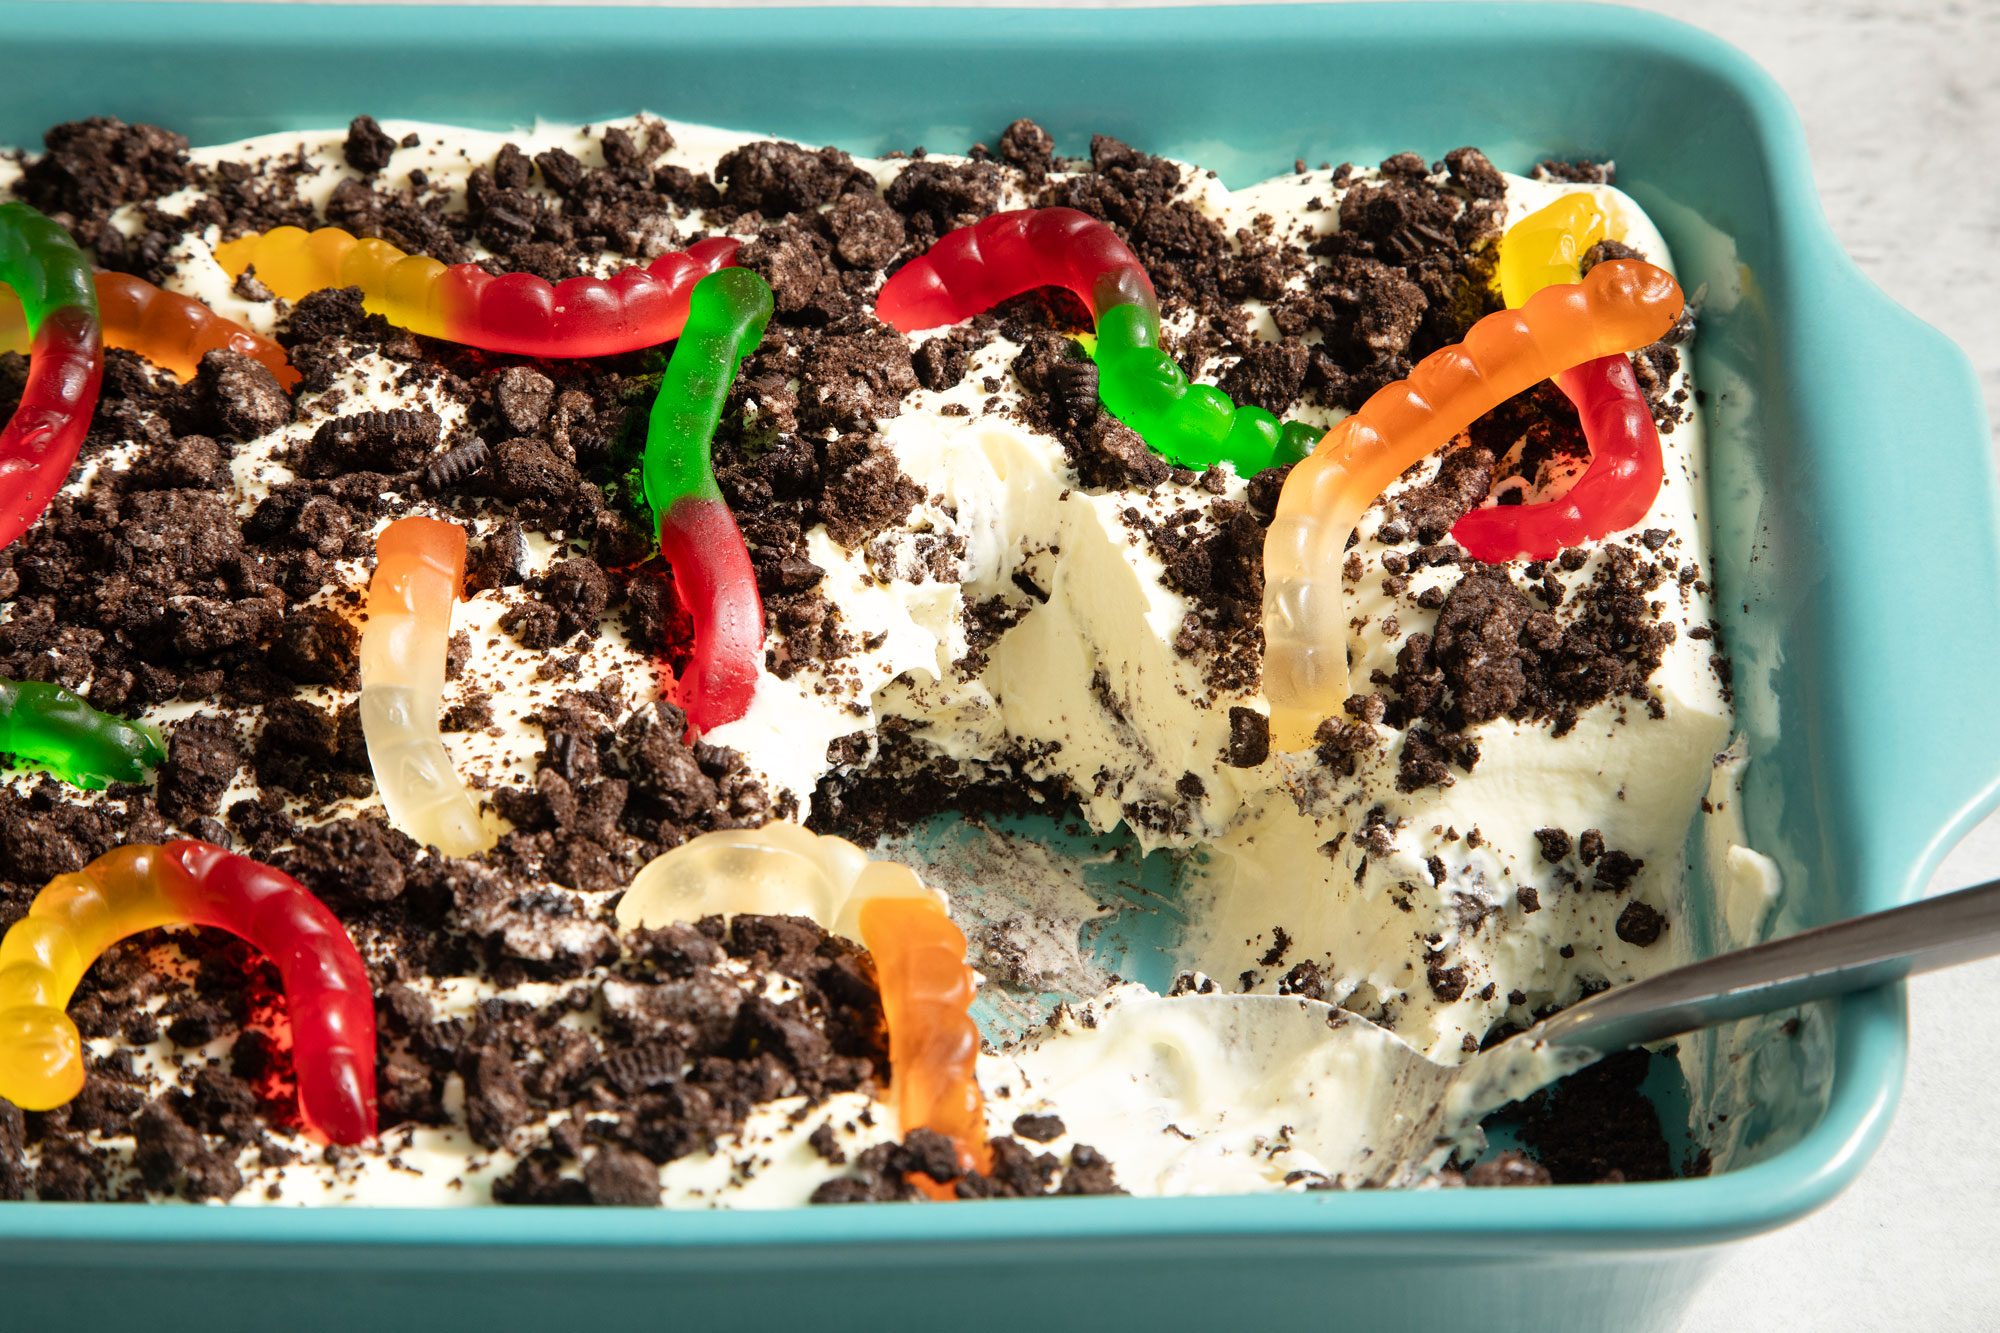 Dirt Dessert Topped With Gummy Worms in a Baking Dish on Grey Background